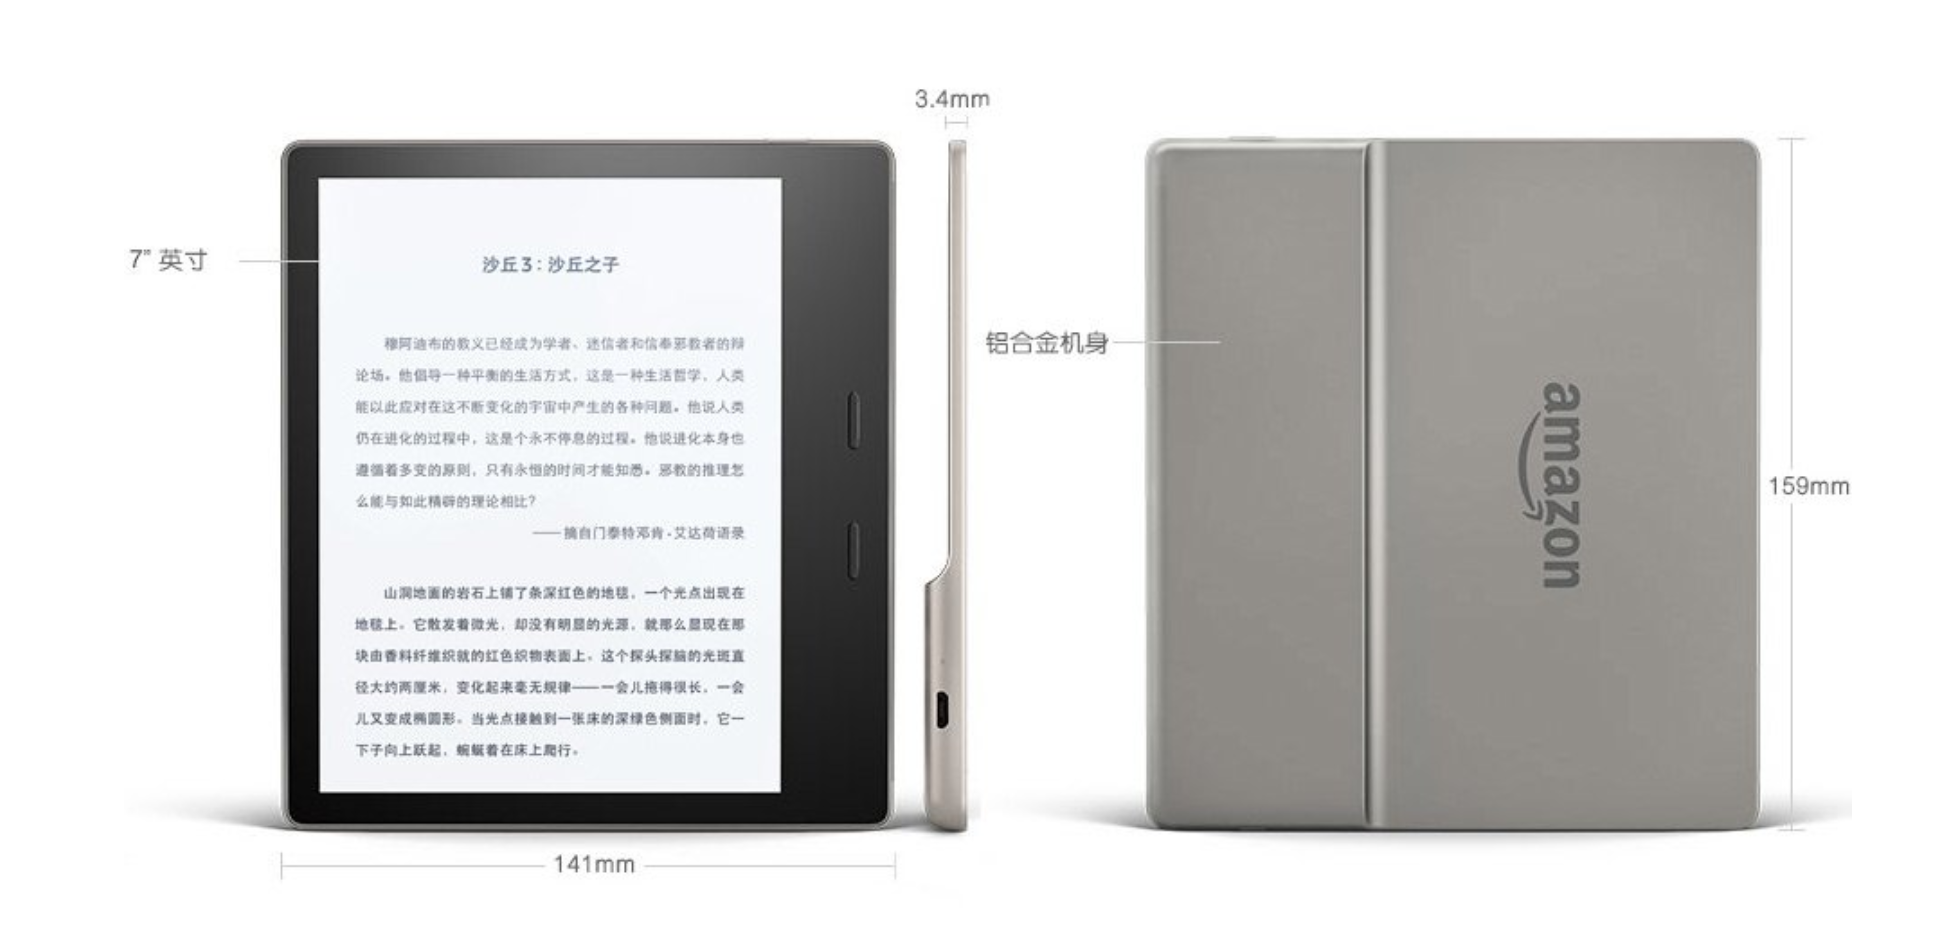 PC/タブレット 電子ブックリーダー 新Kindle Oasis 真机试玩：2399 元值不值得买？ | 爱范儿